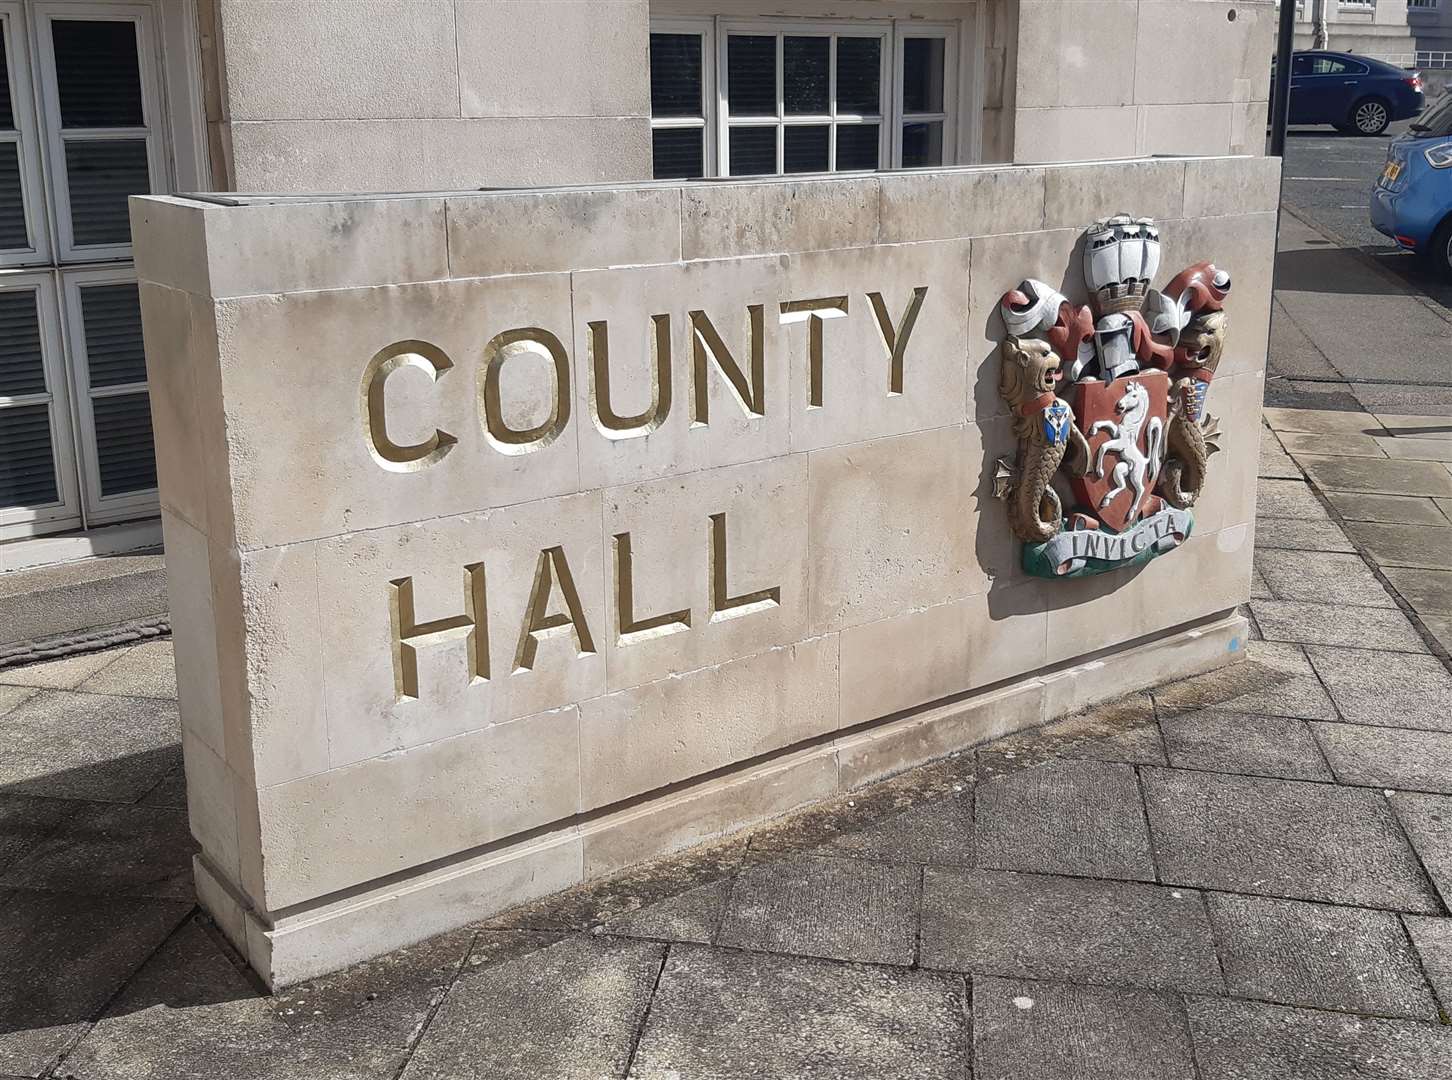 County Hall in Maidstone